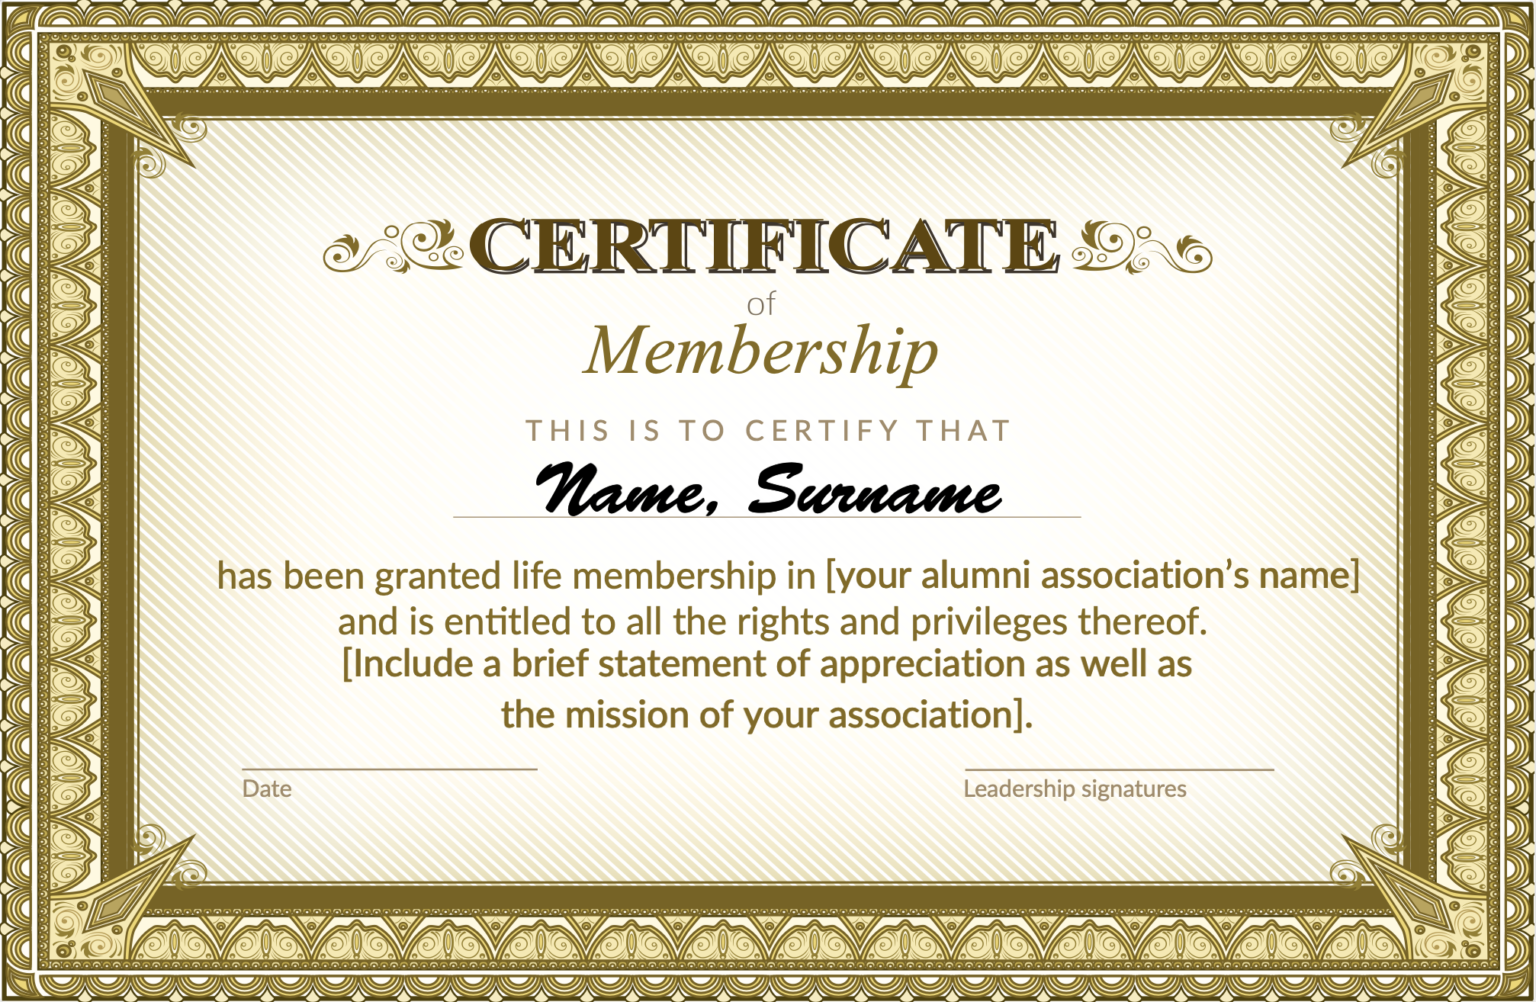 Show Your Appreciation With Membership Certificates